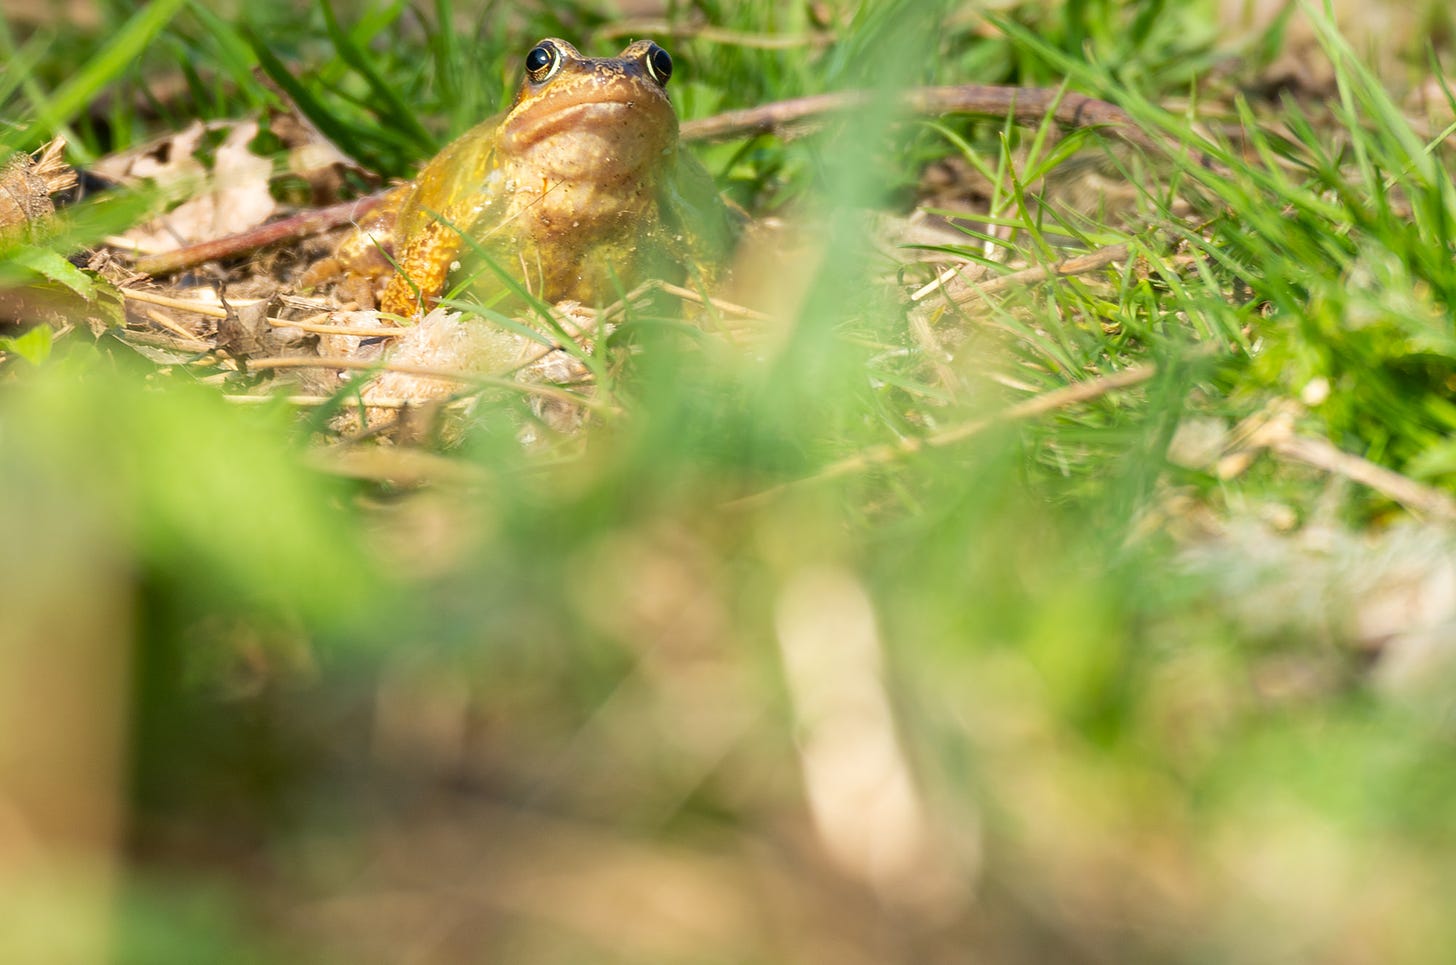 Common frog among grass and vegetation, photographed by Rhiannon Law